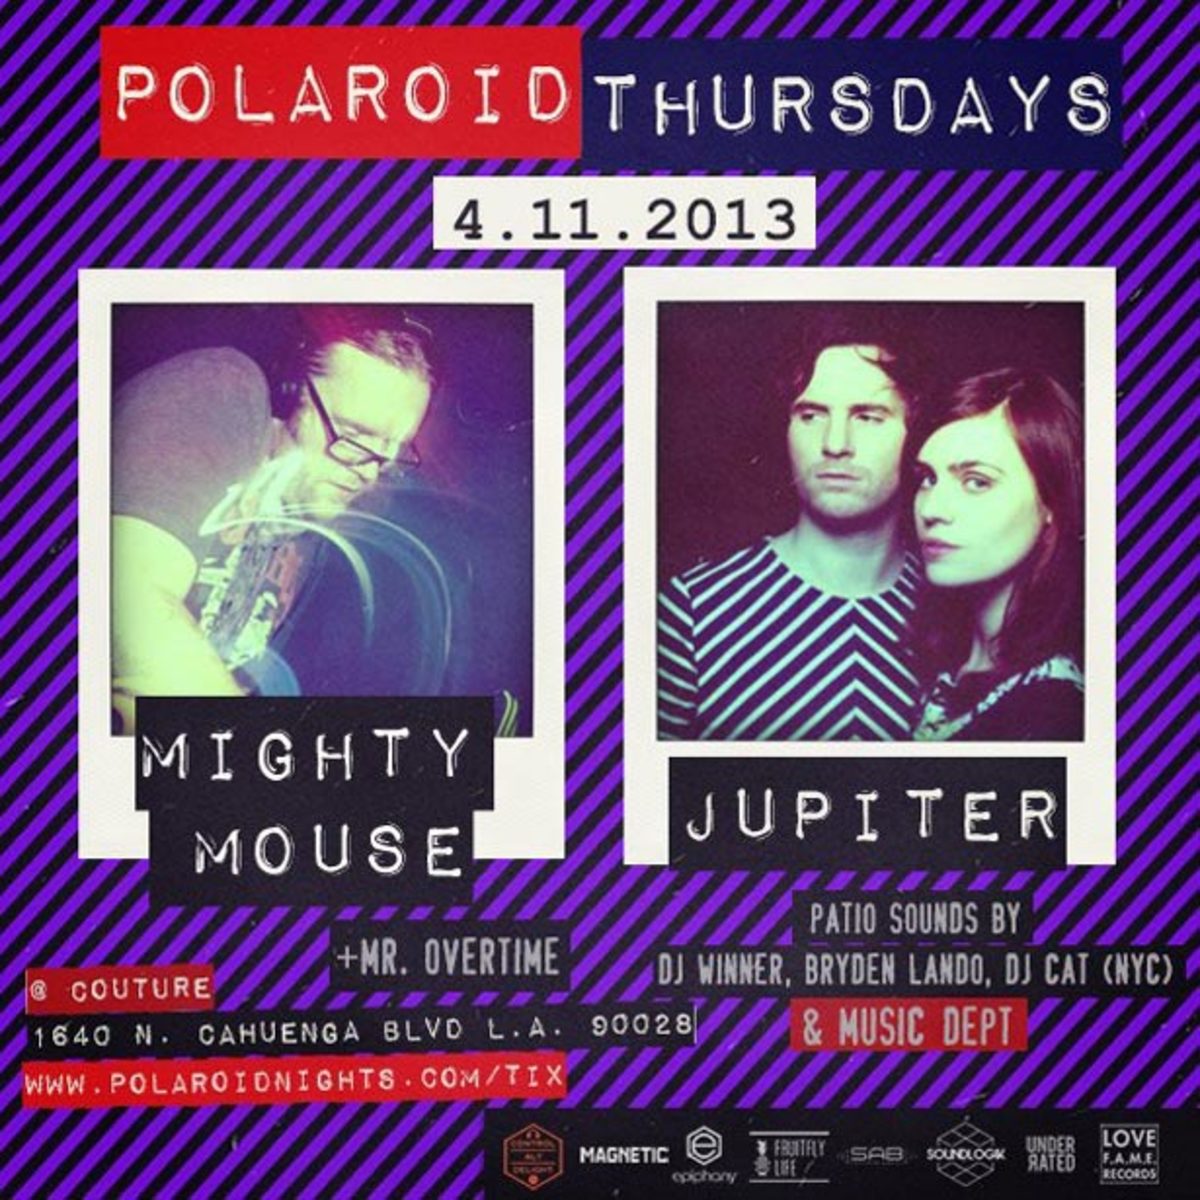 Ticket Contest: Polaroid Thursdays with Mighty Mouse & Jupiter